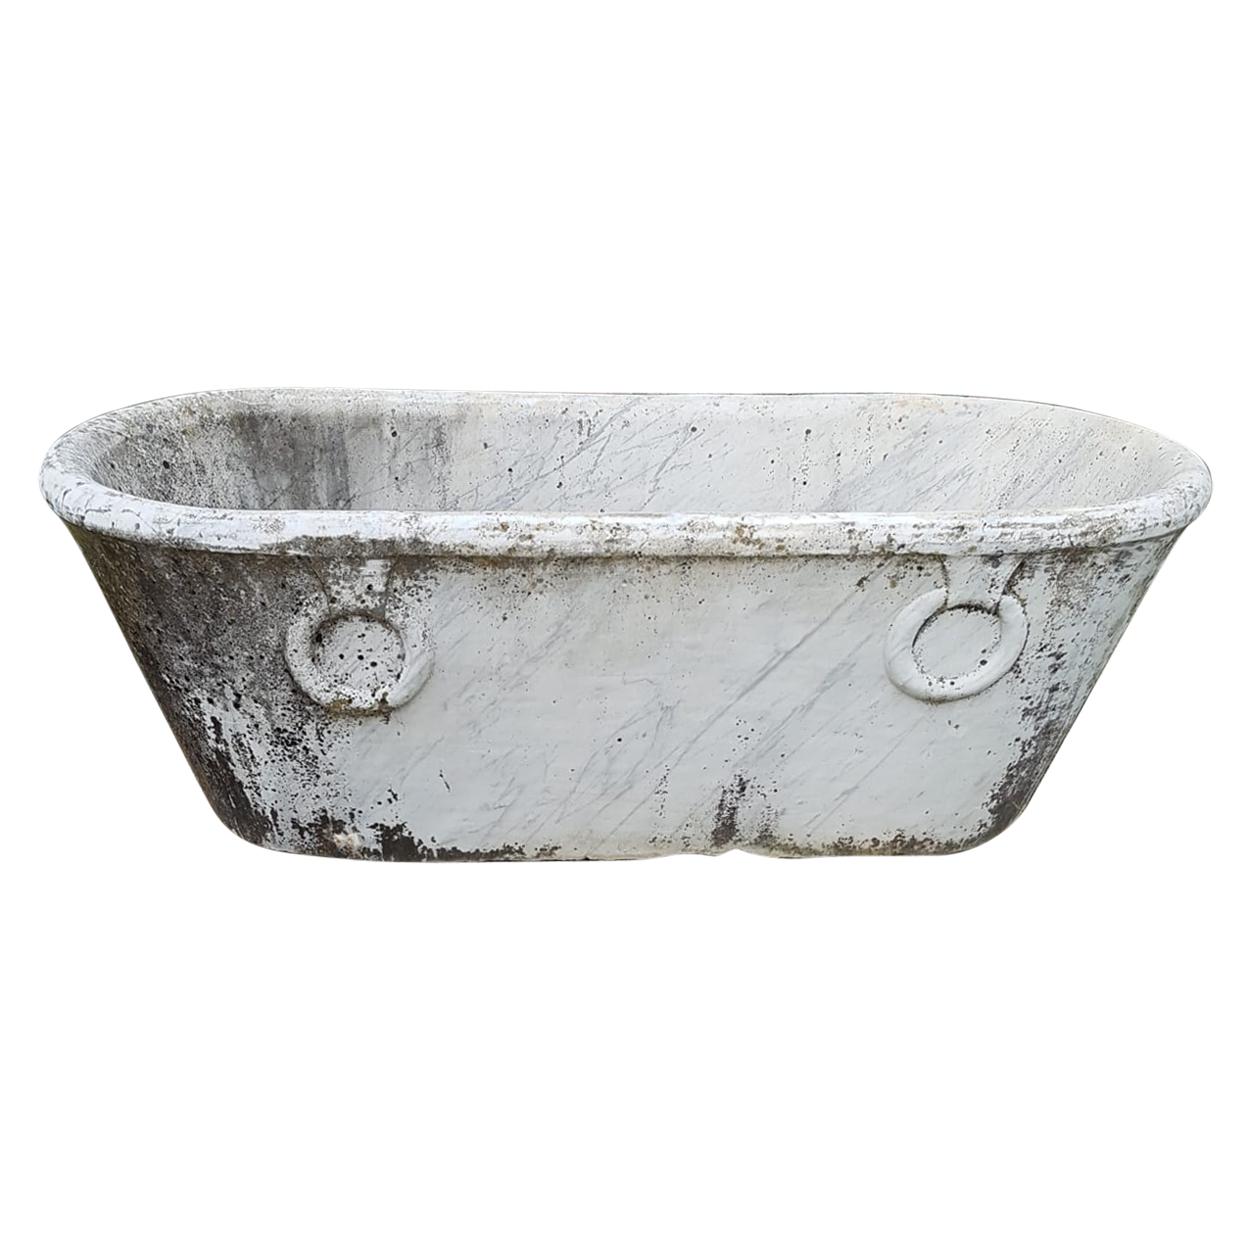 19th Century French Empire Bathtub in Marble, 1805s